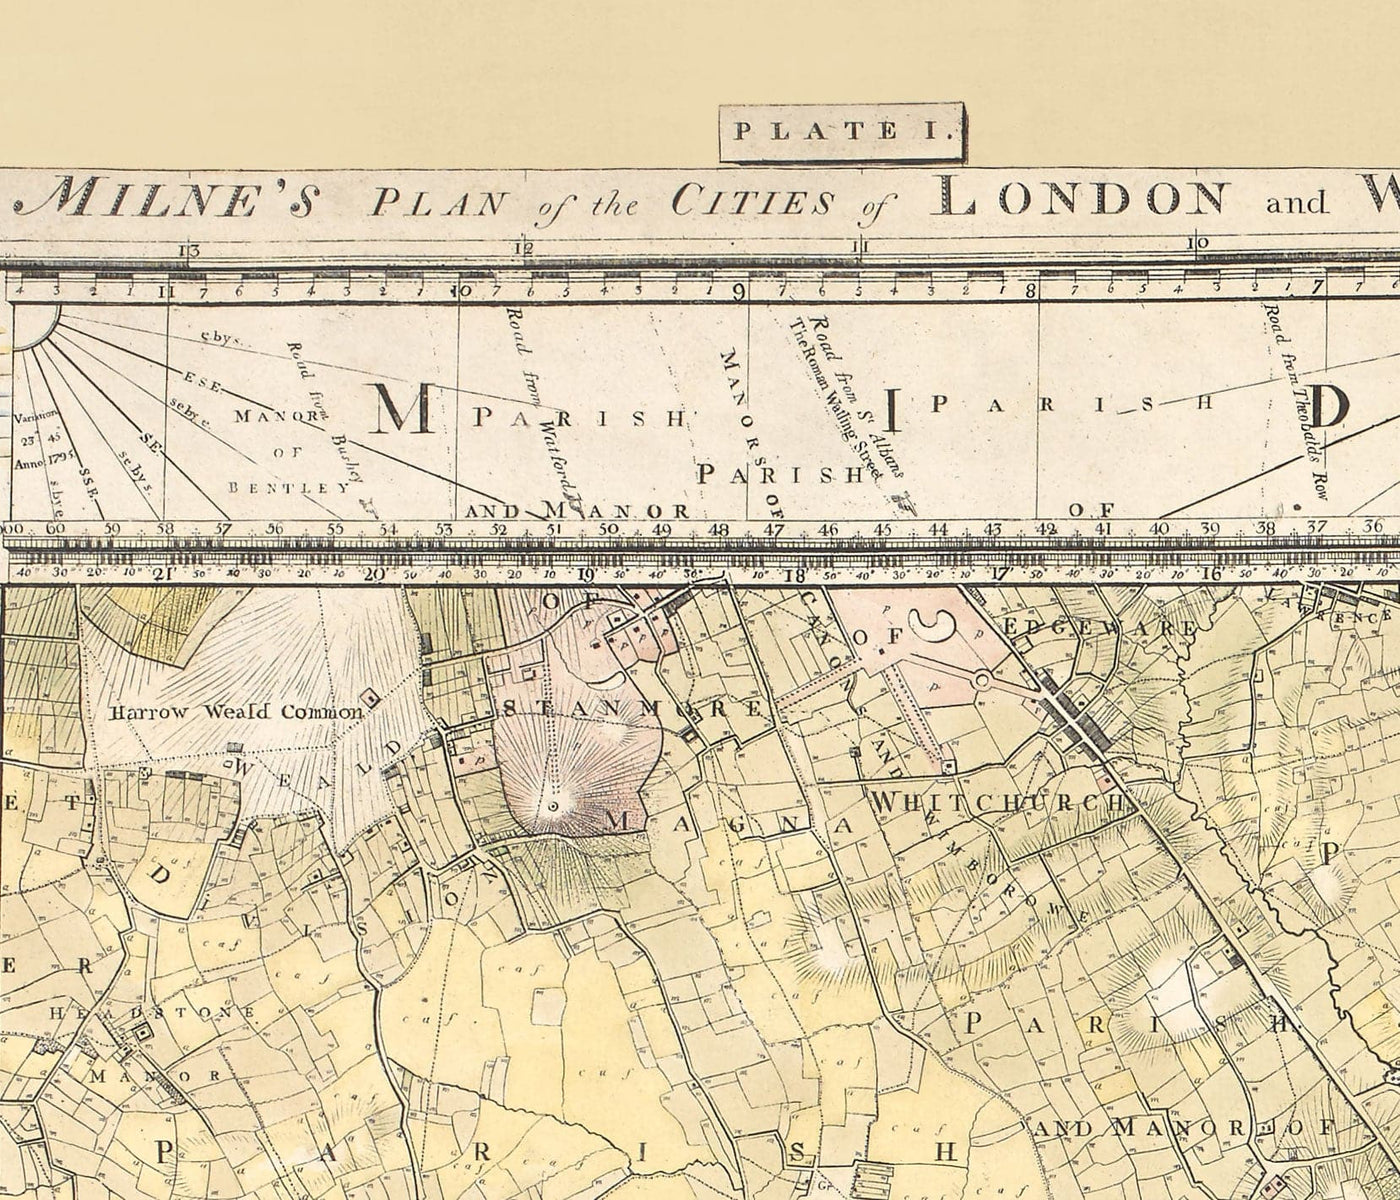 Rare Old Map of London and Suburbs, 1799 by Milne - City, Hackney, Westminster, Dalston, Hampstead, Fields